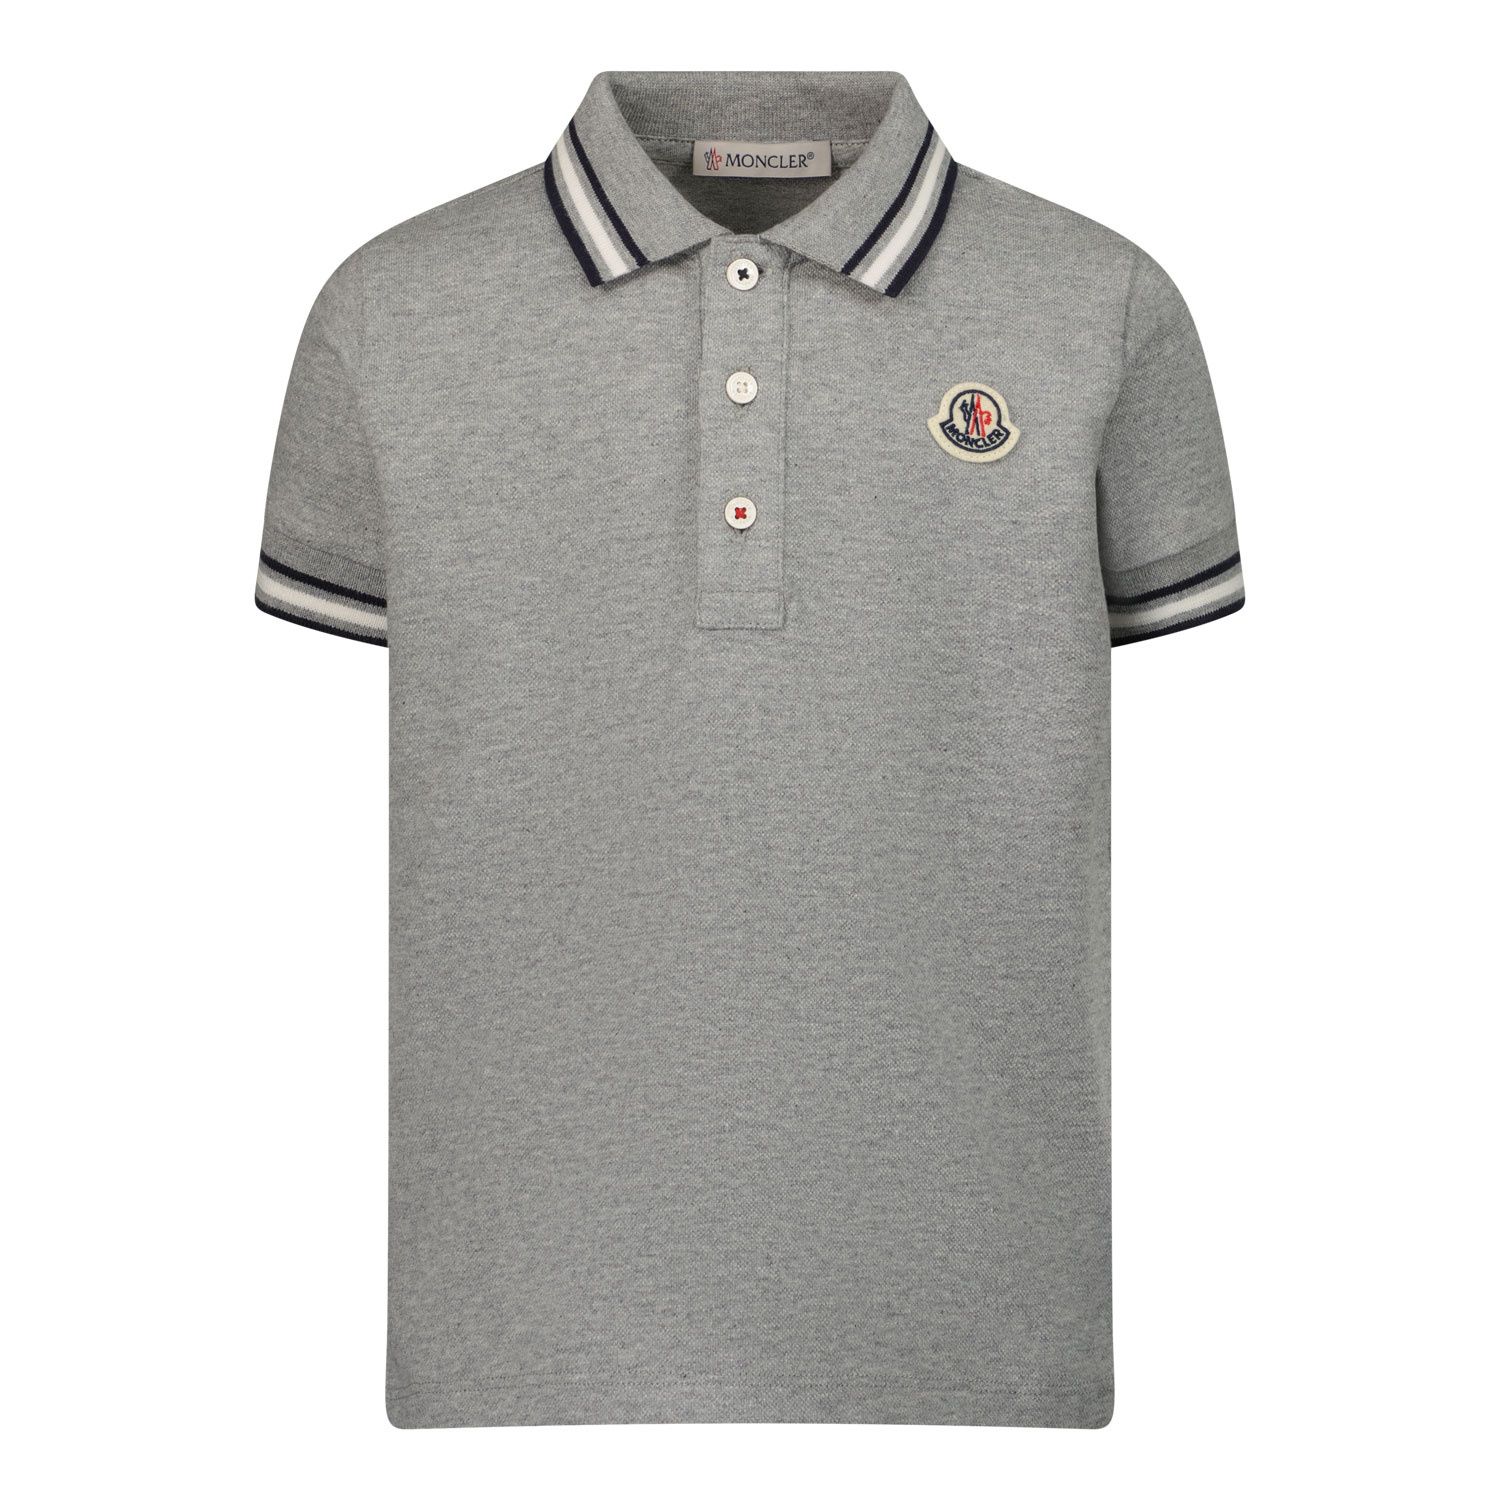 Picture of Moncler 8A00004 baby poloshirt grey